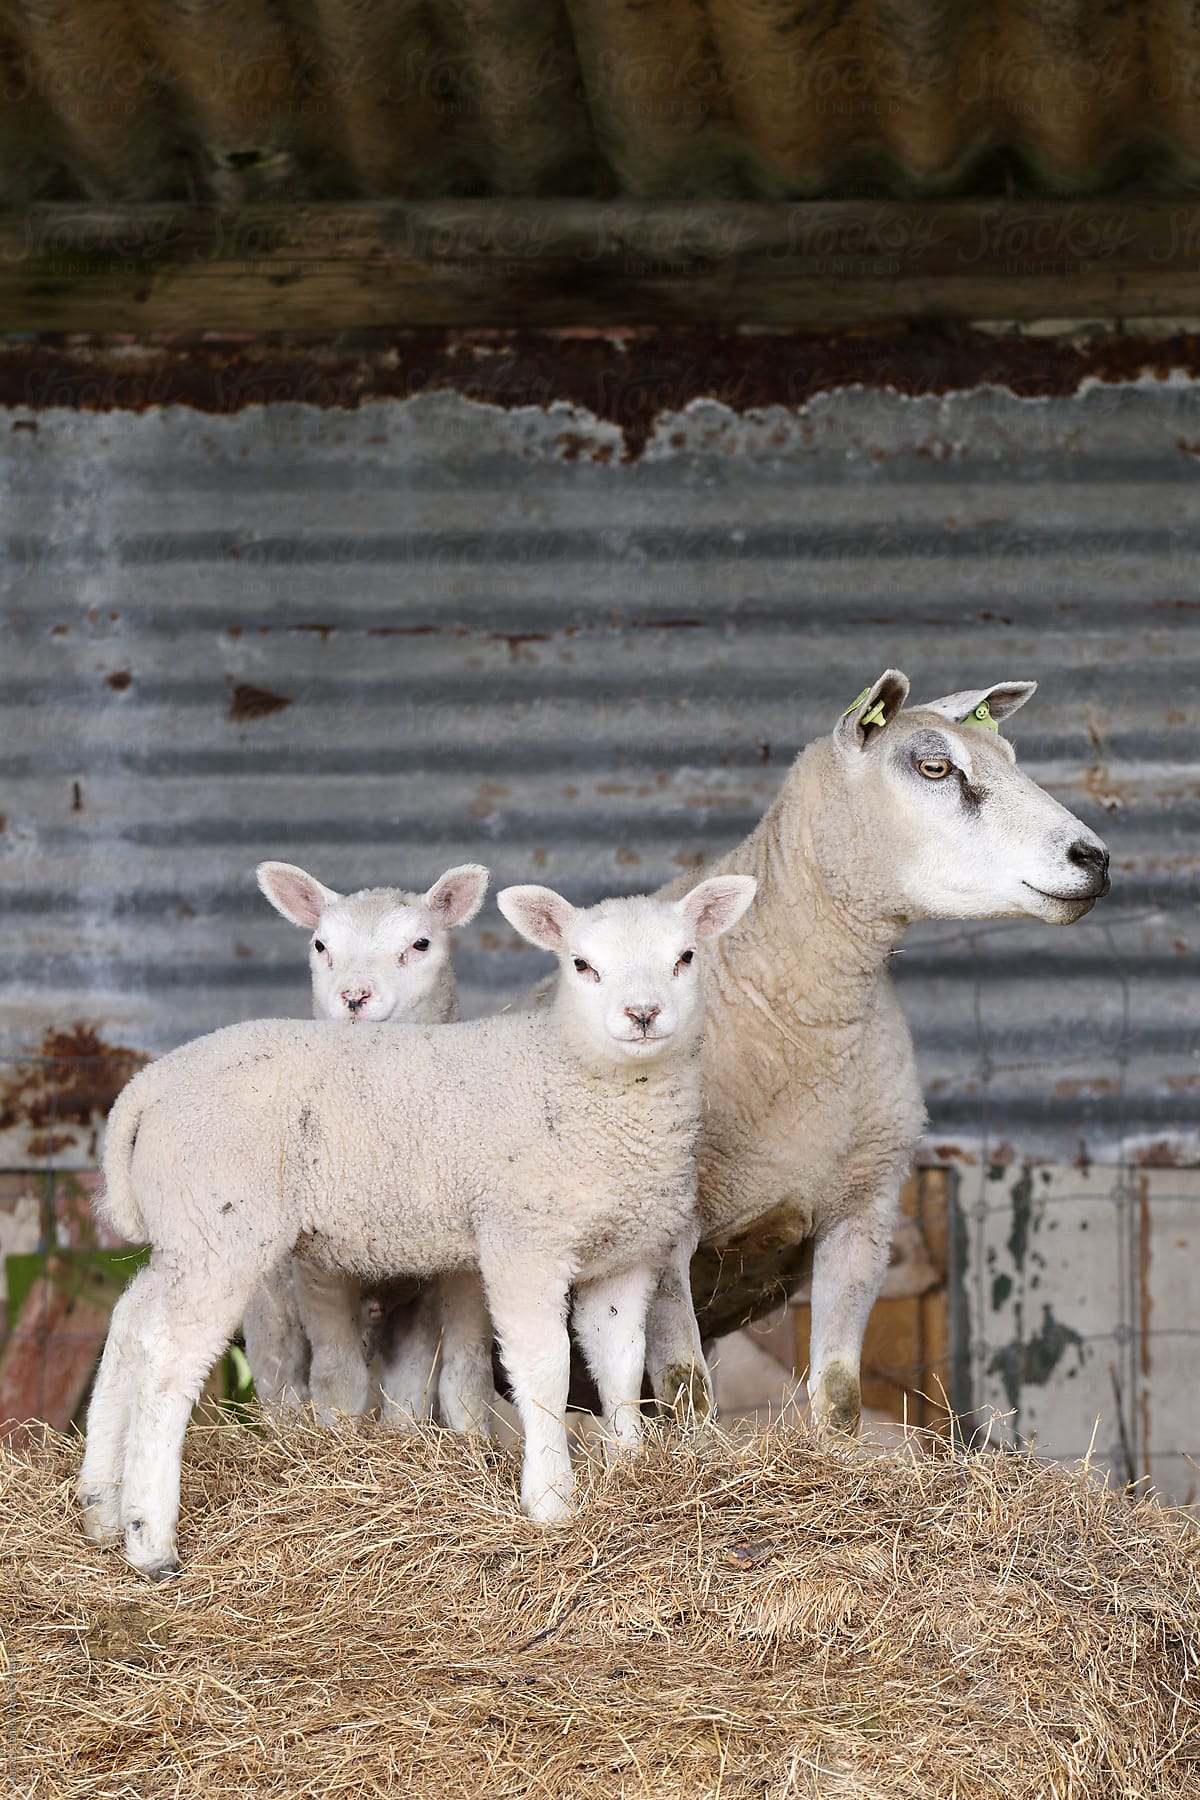 Mother sheep and two young lambs